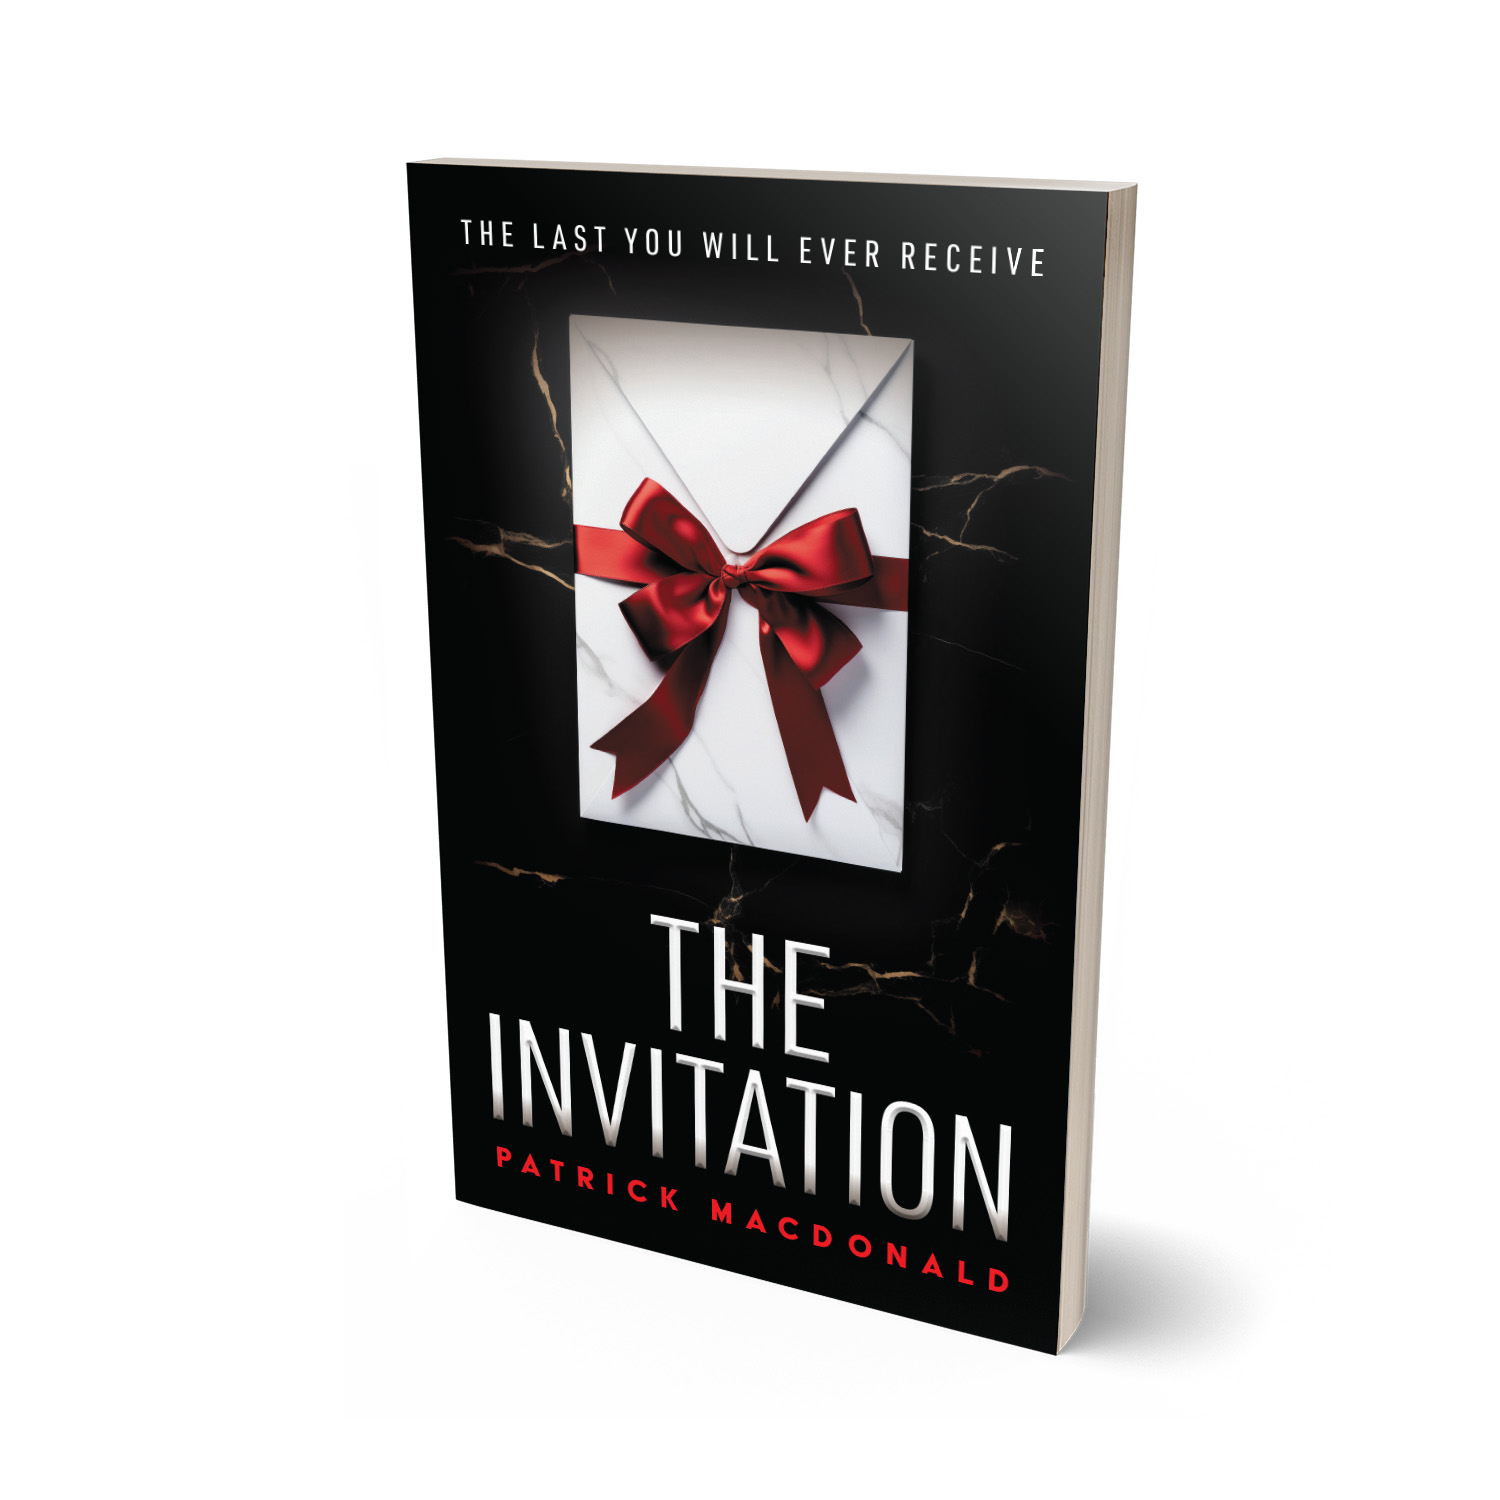 'The Invitation' is a dark, countdown-driven murder thriller by Patrick MacDonald. The book cover design and interior formatting are by Mark Thomas. To learn more about what Mark could do for your book, please visit coverness.com.